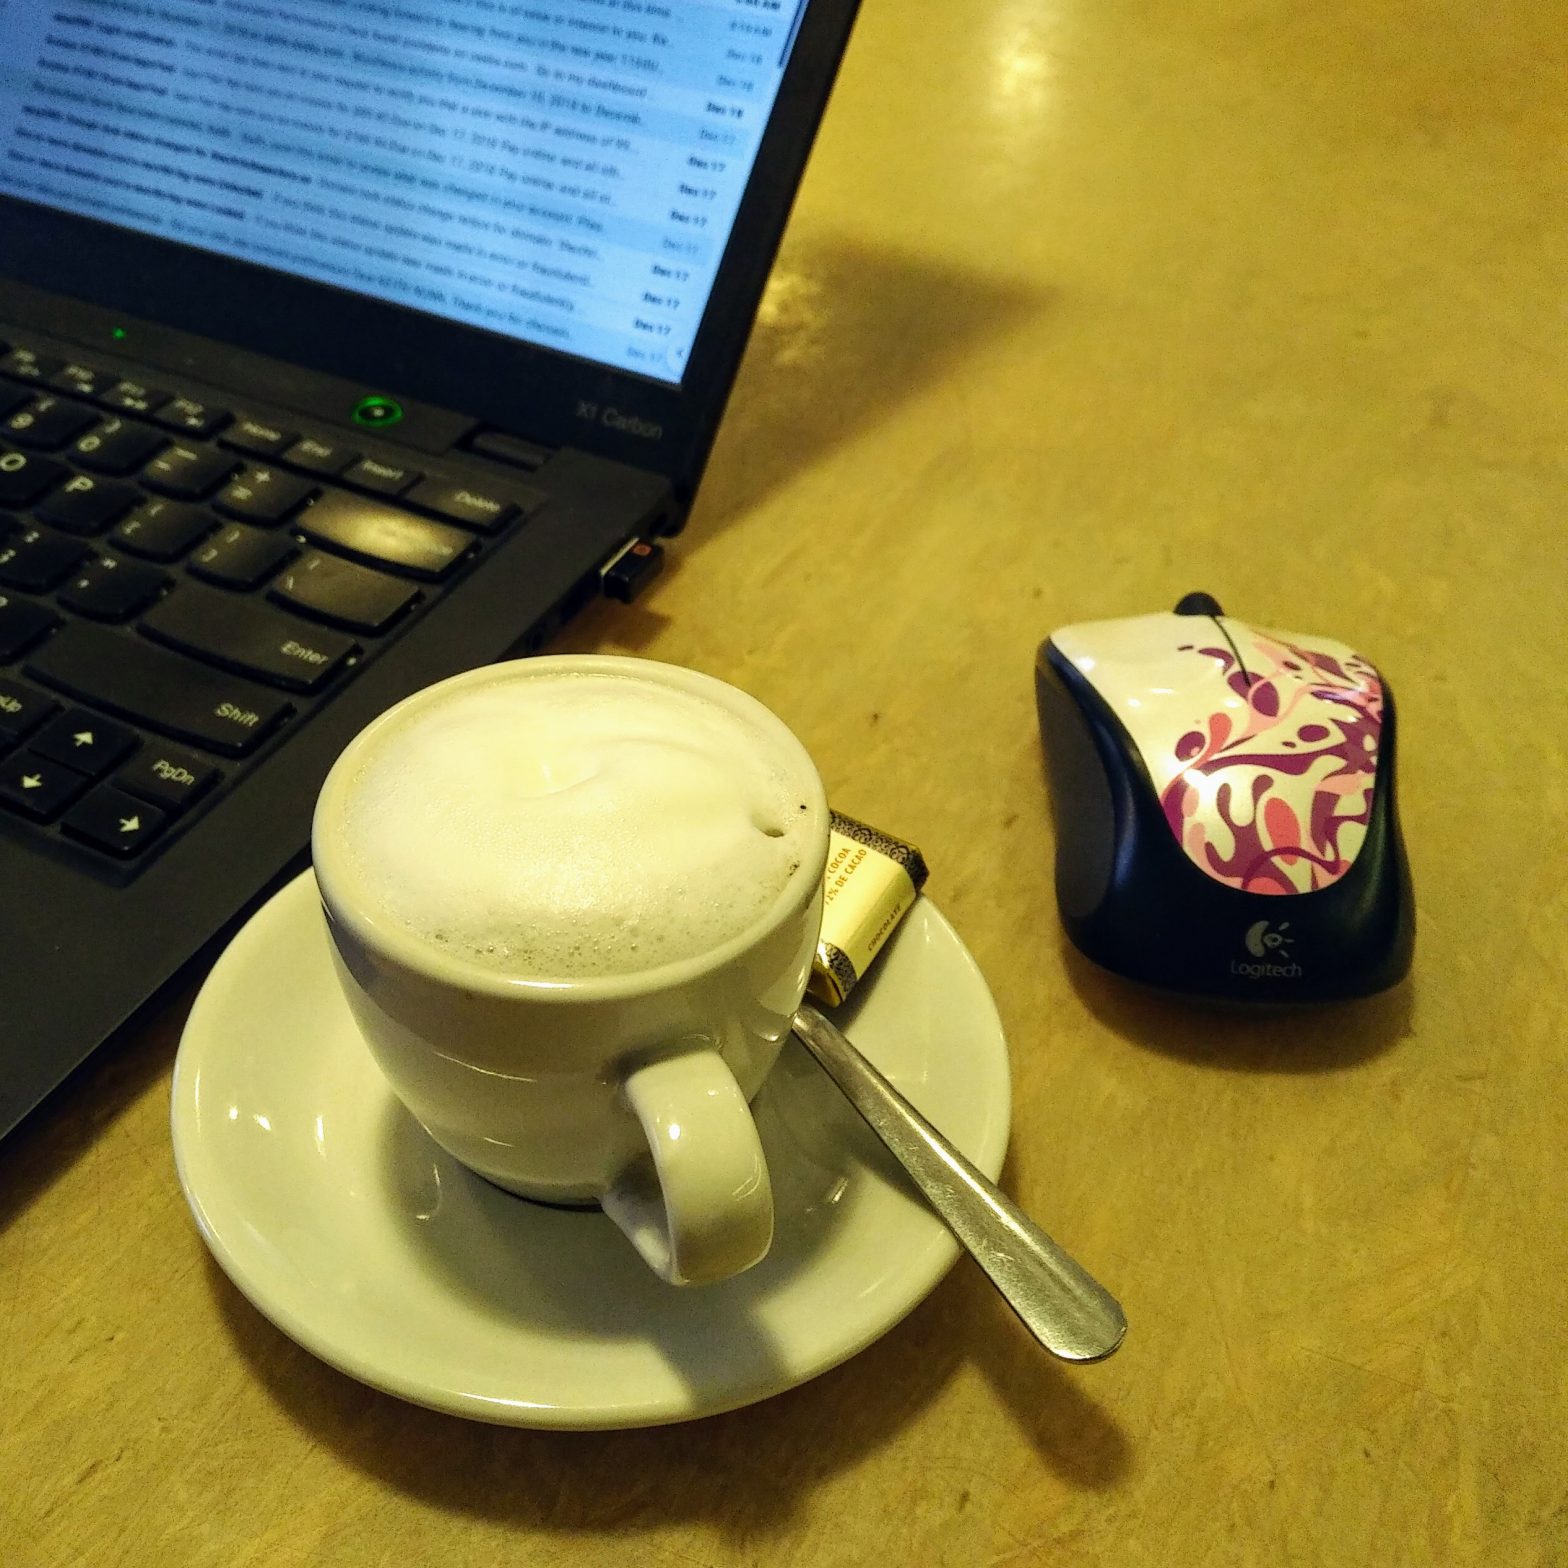 coffee computer mouse and edge of laptop